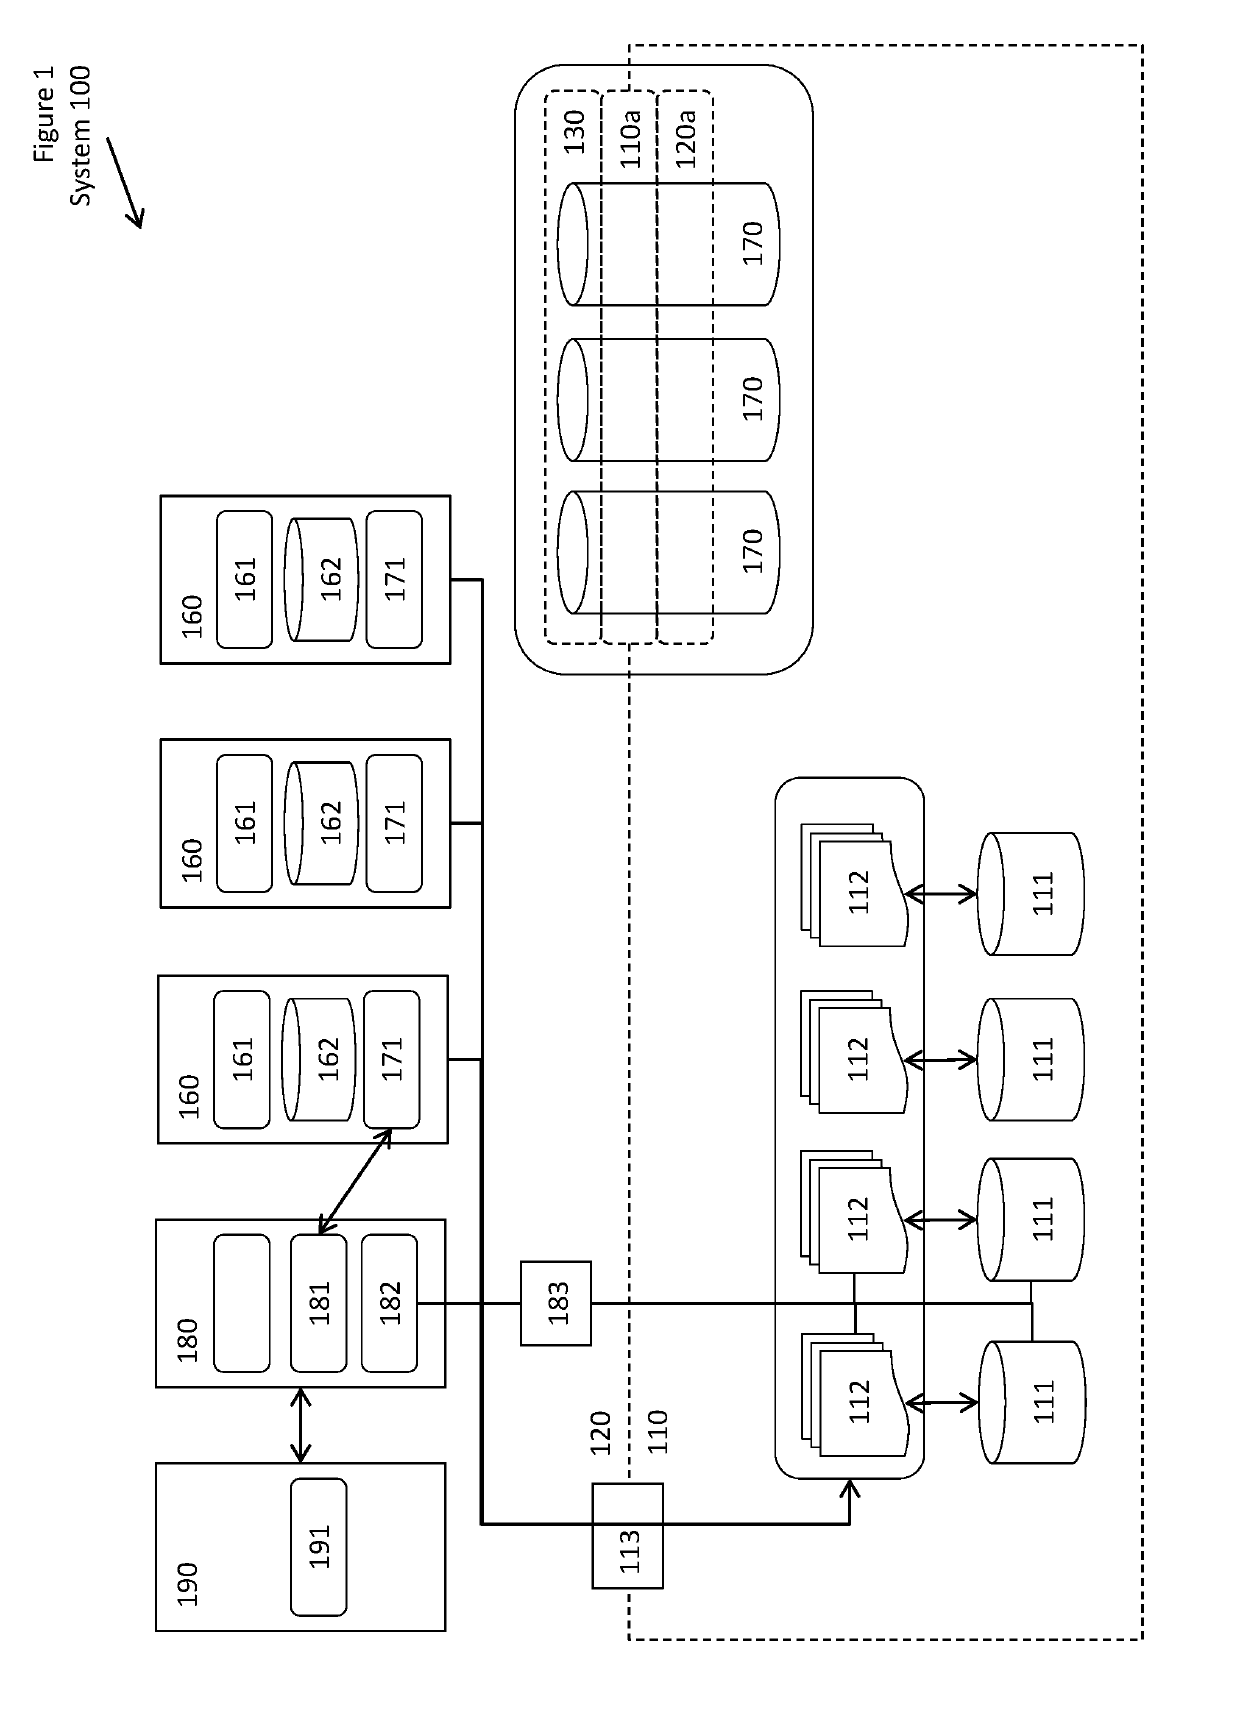 Virtual devices in a reliable distributed computing system